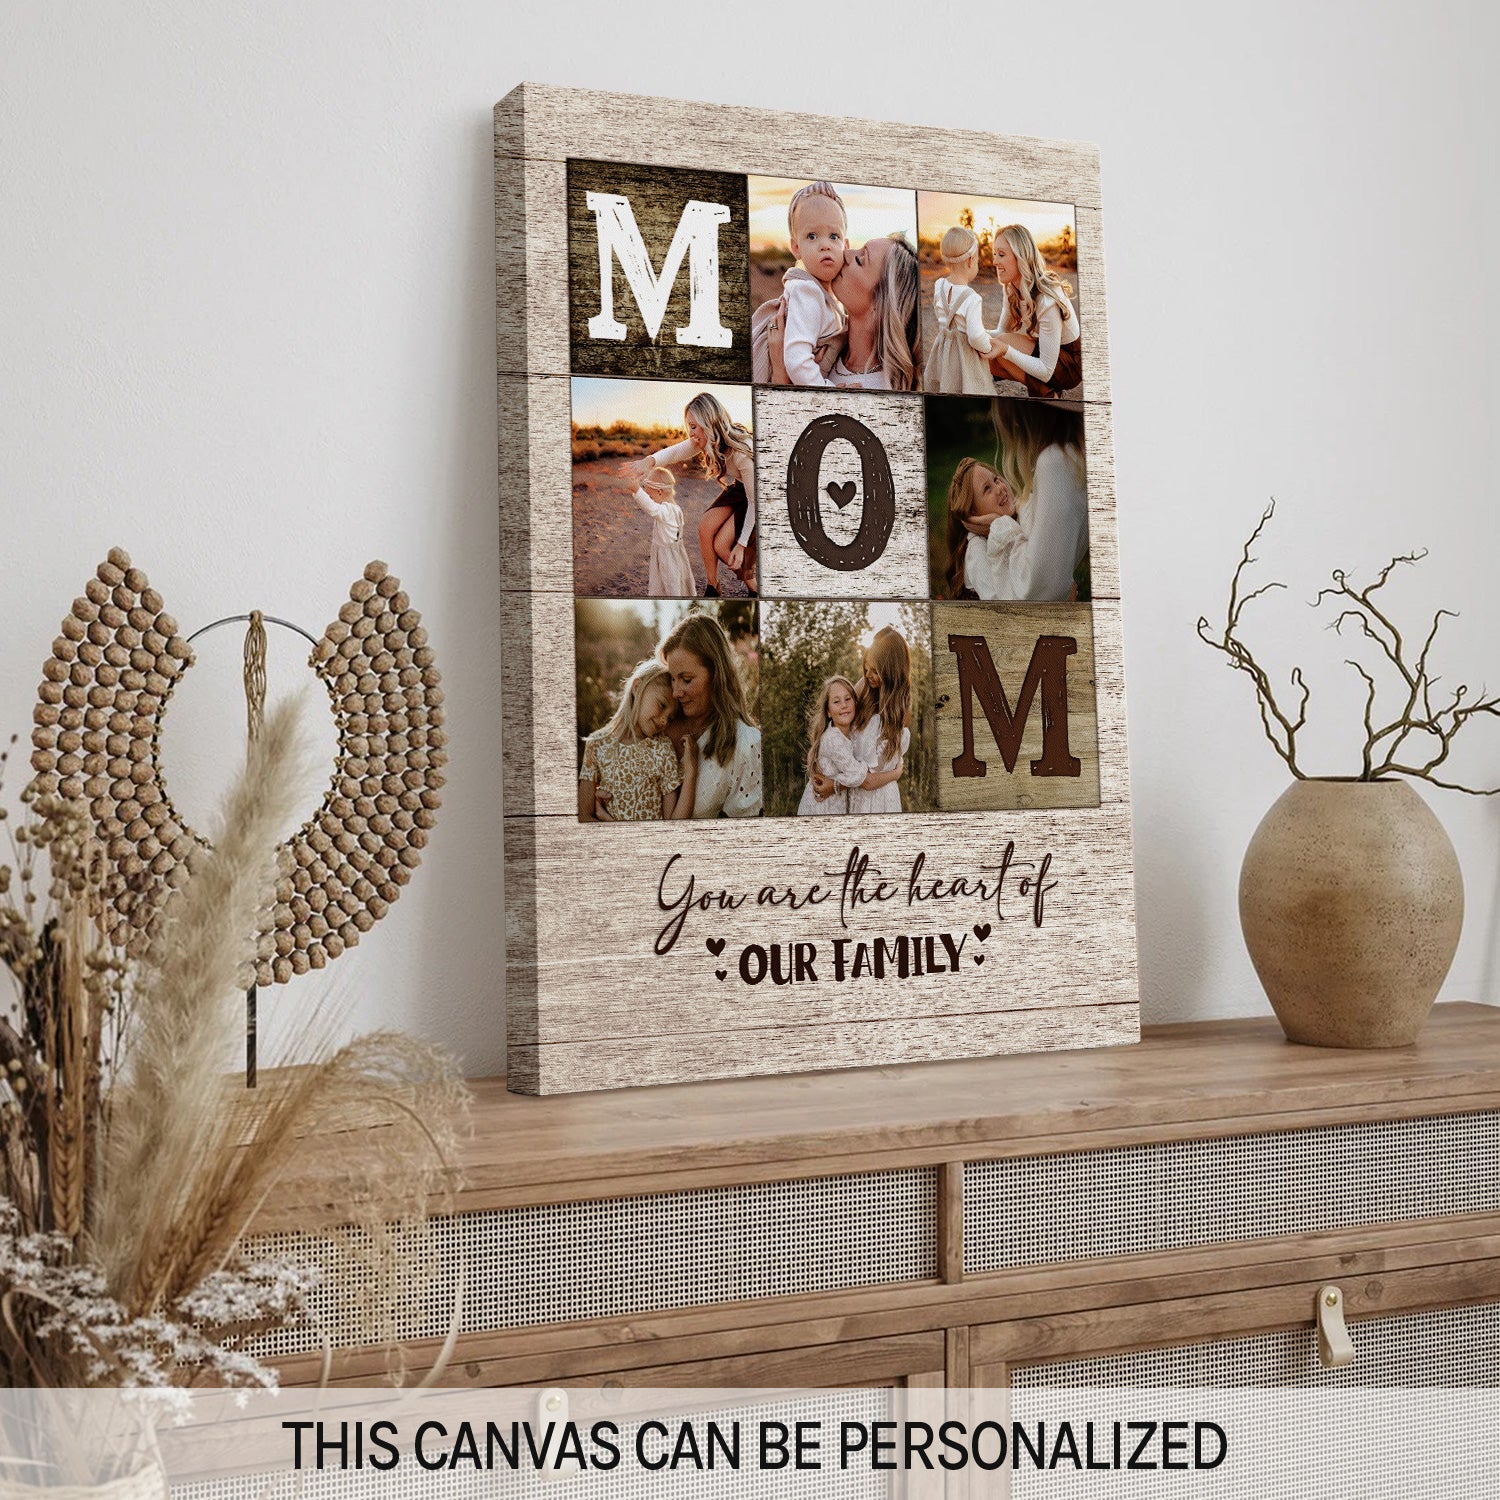 Mom You Are The Heart Of Our Family - Personalized  gift For Mom - Custom Canvas Print - MyMindfulGifts